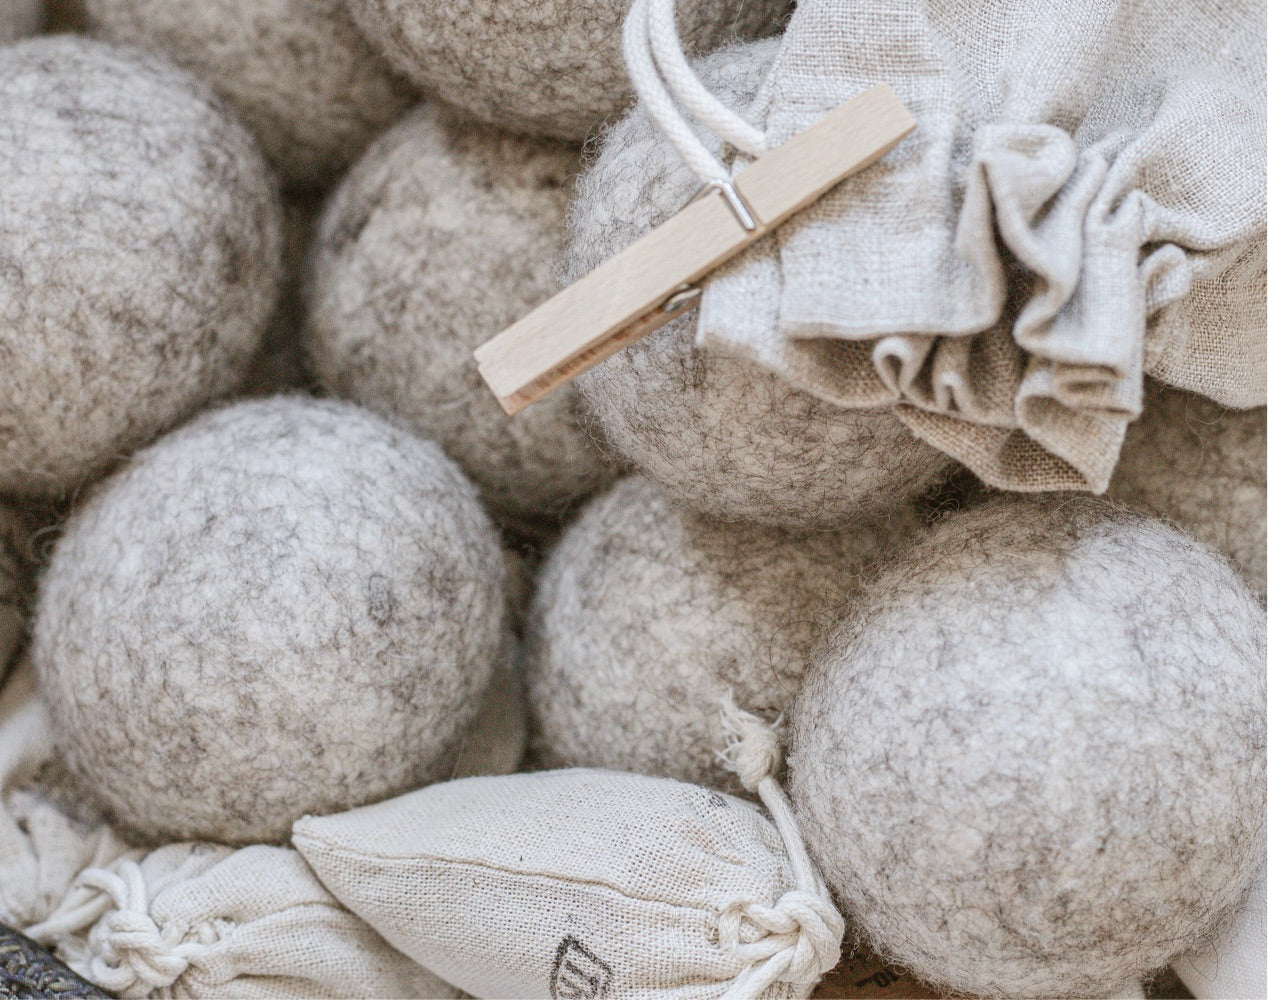 Wool dryer balls, linen bag of wooden clothes pins, and sachets of organic dried lavender